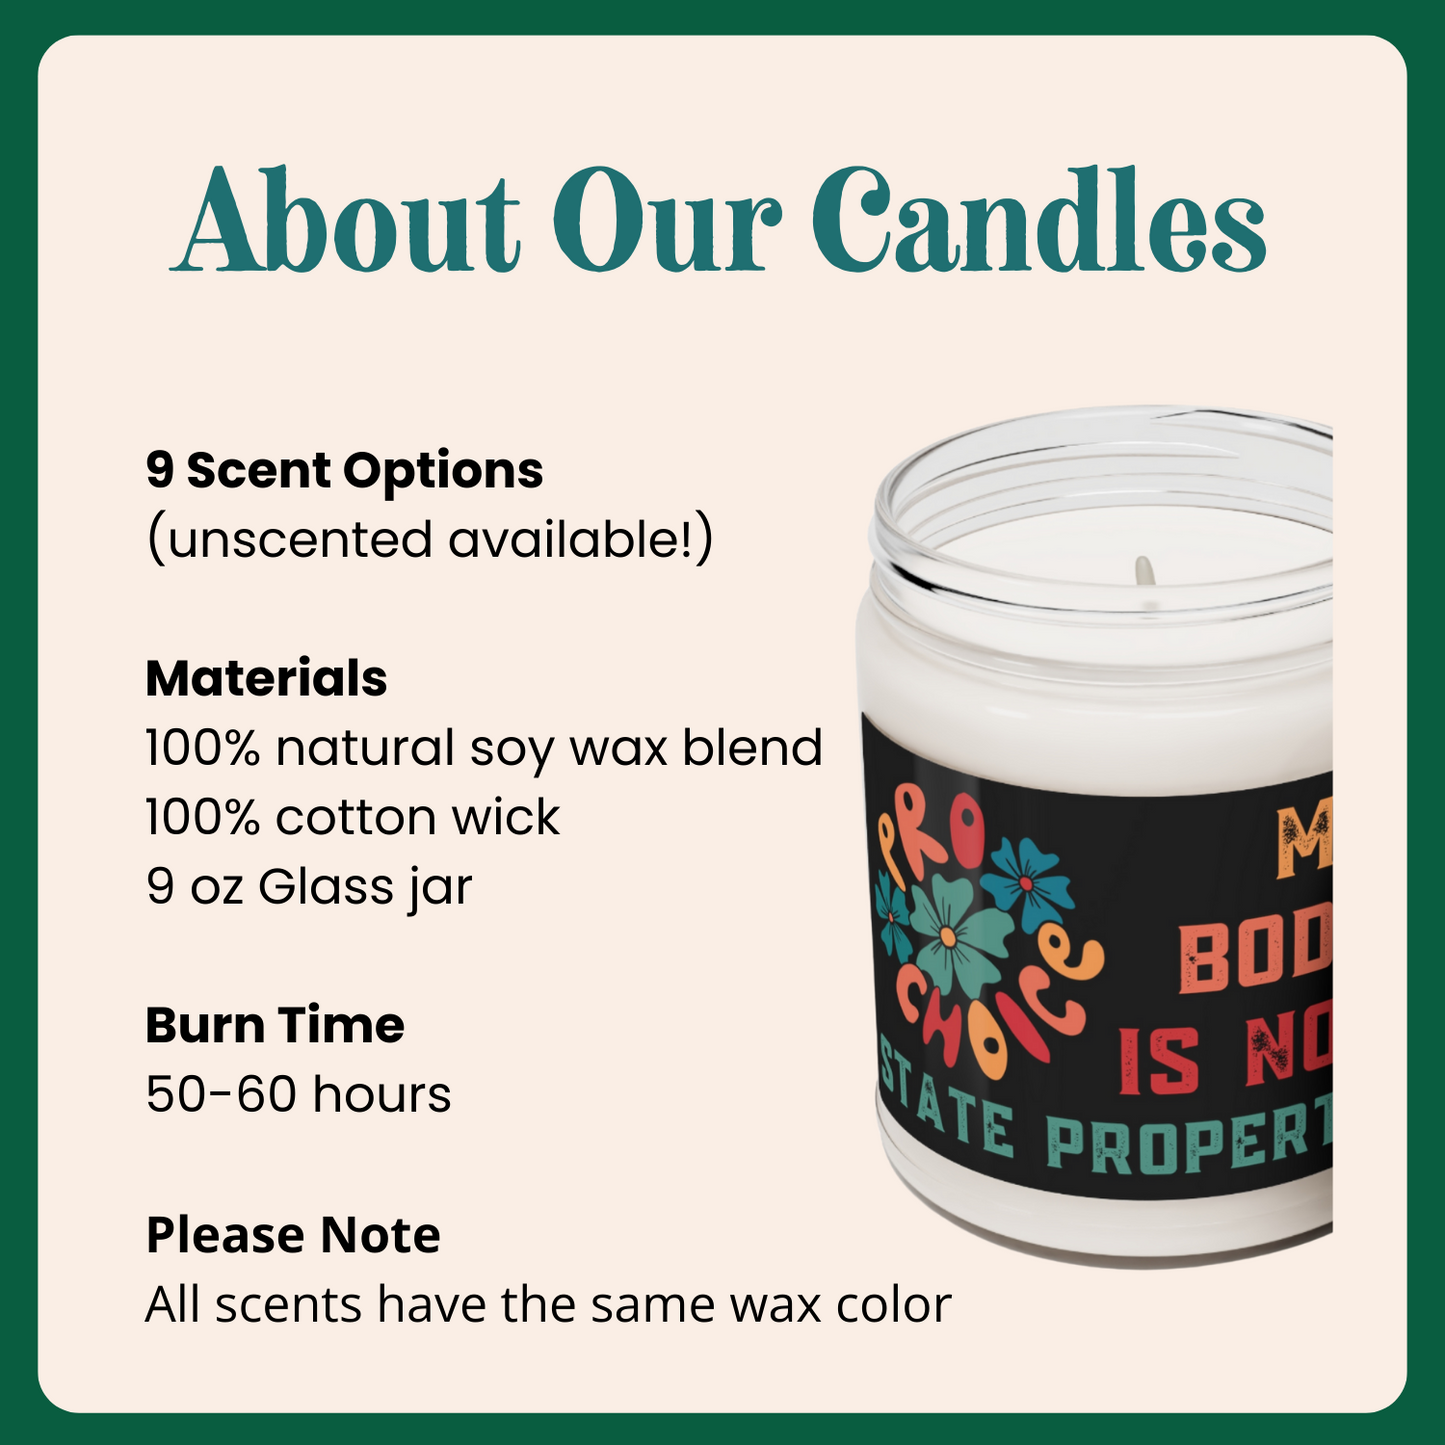 Scented soy candle with 50-60 hour burn time, 100% natural soy wax blend. Unscented available, as well. 